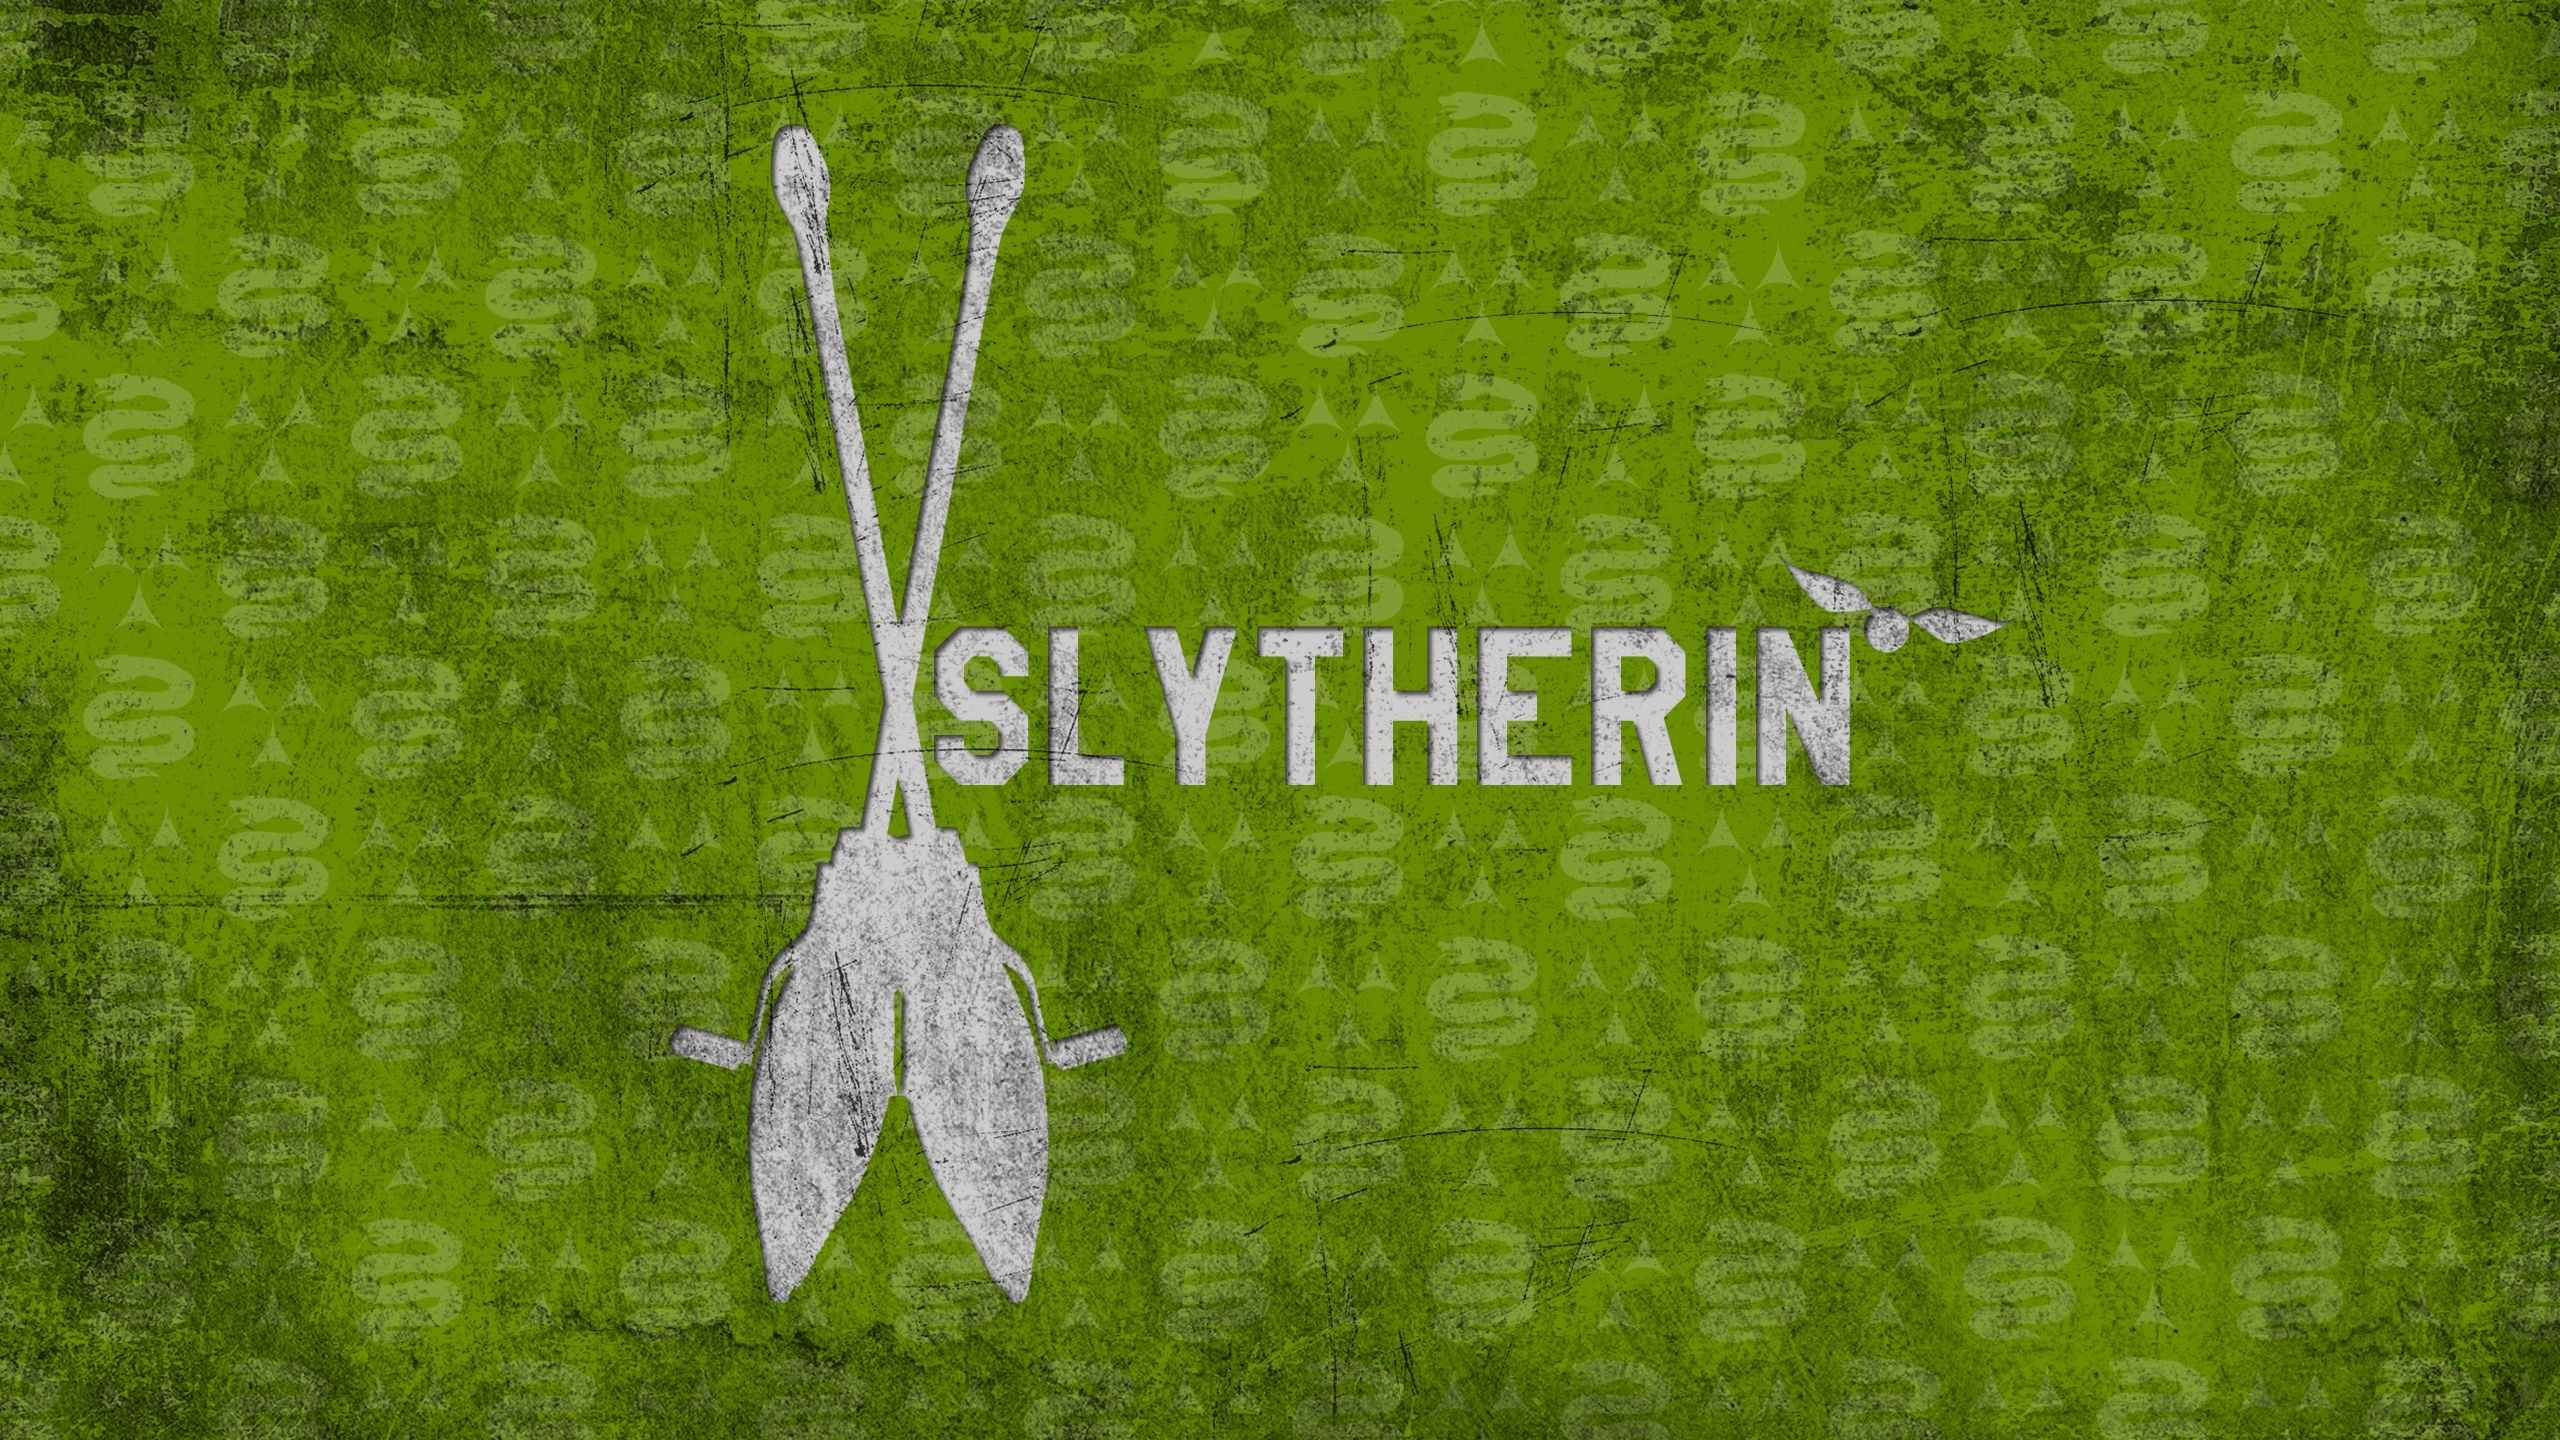 Slytherin Wallpaper pictuers)